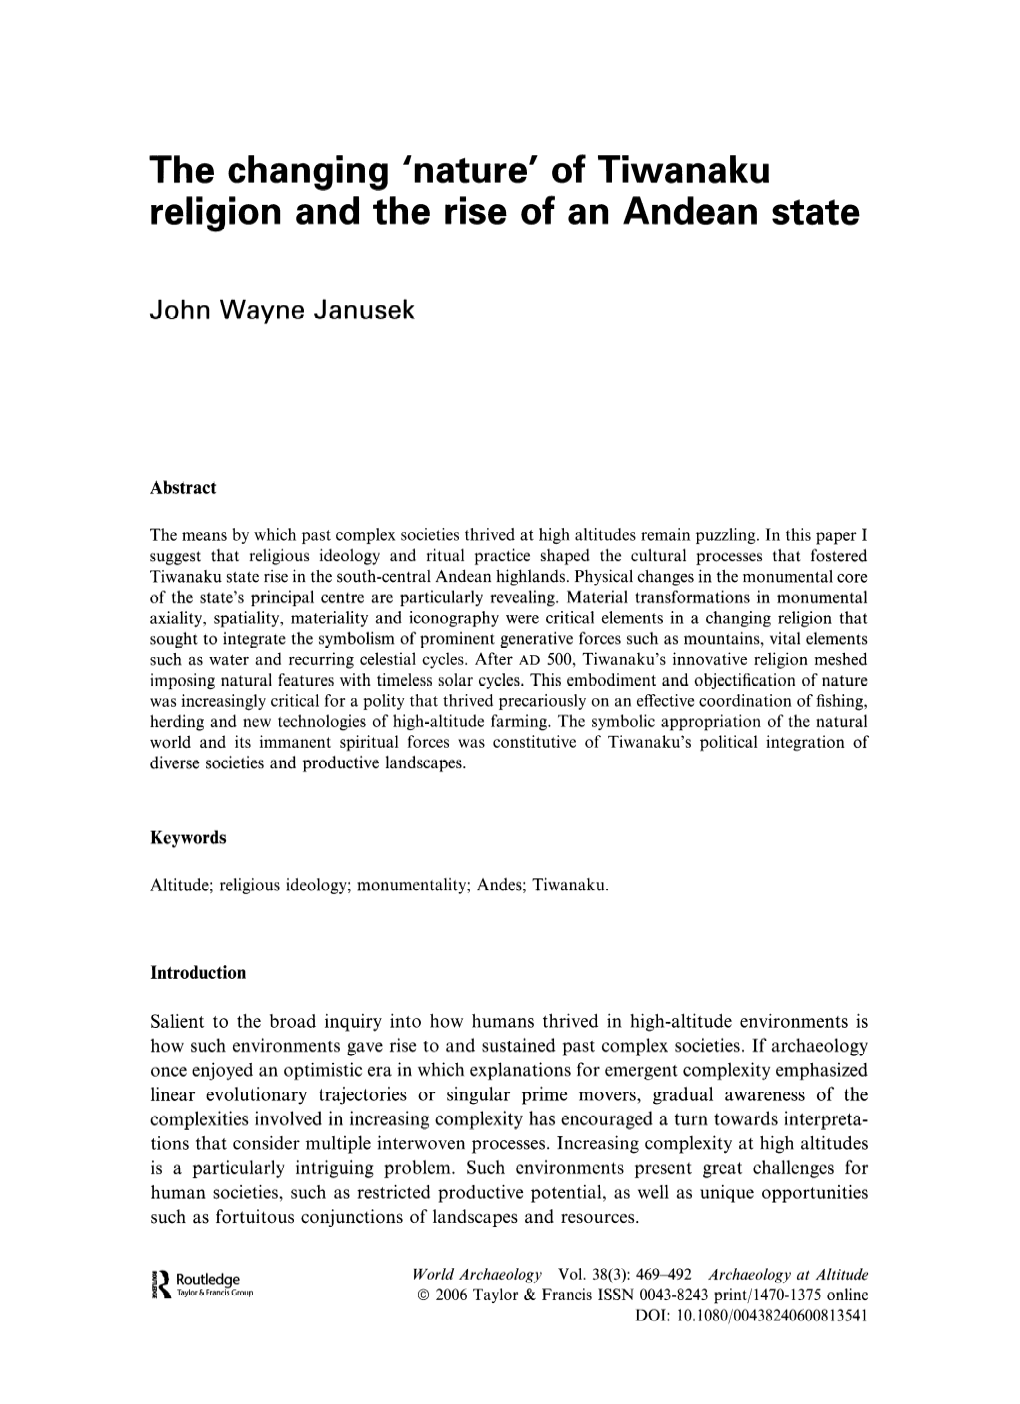 Of Tiwanaku Religion and the Rise of an Andean State